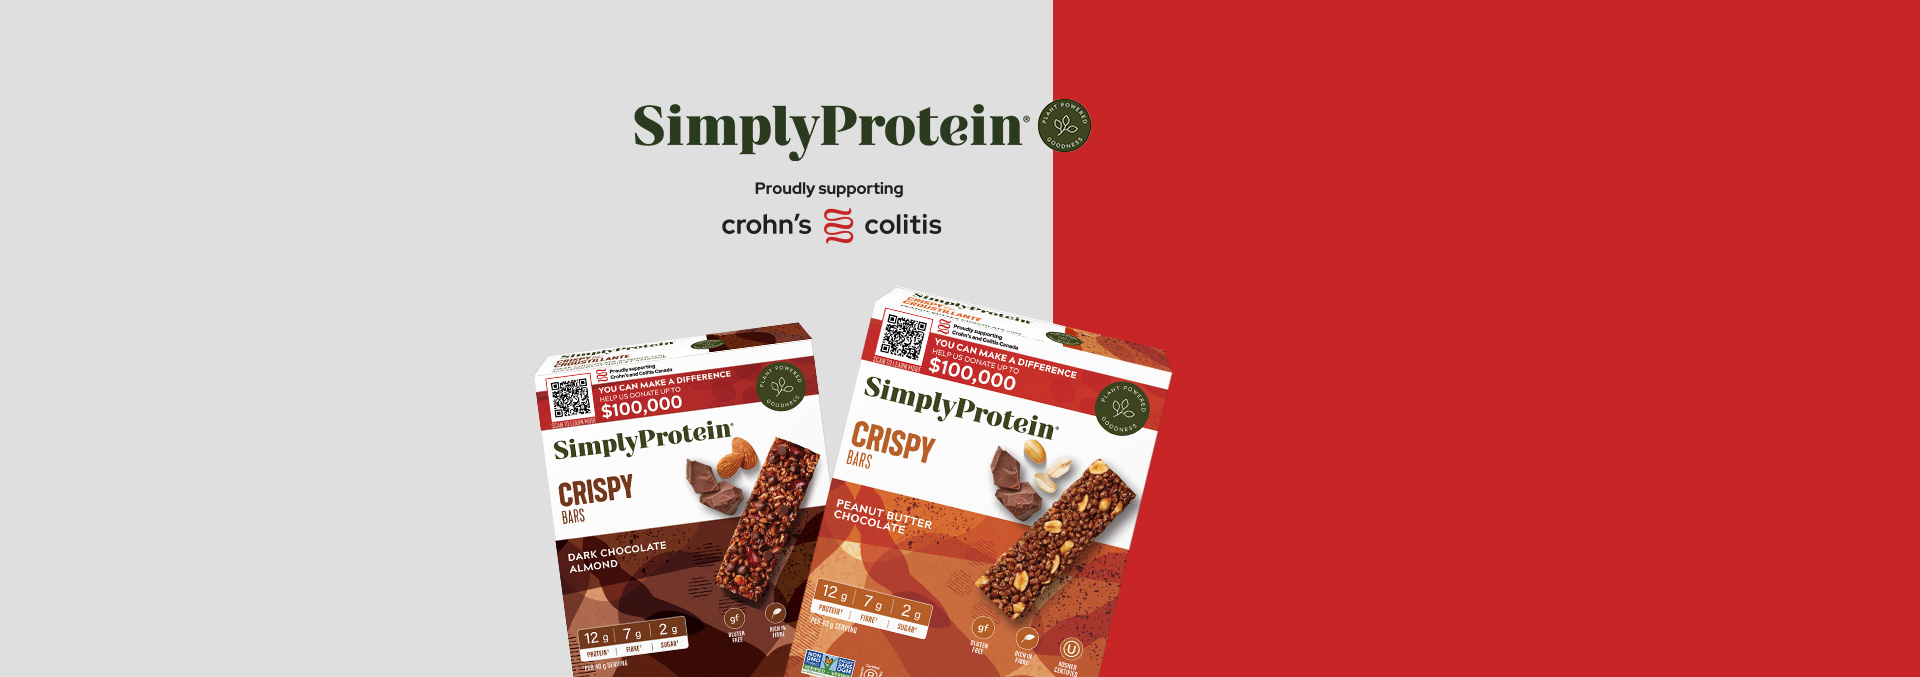 SimplyProtein Crispy bars boxes